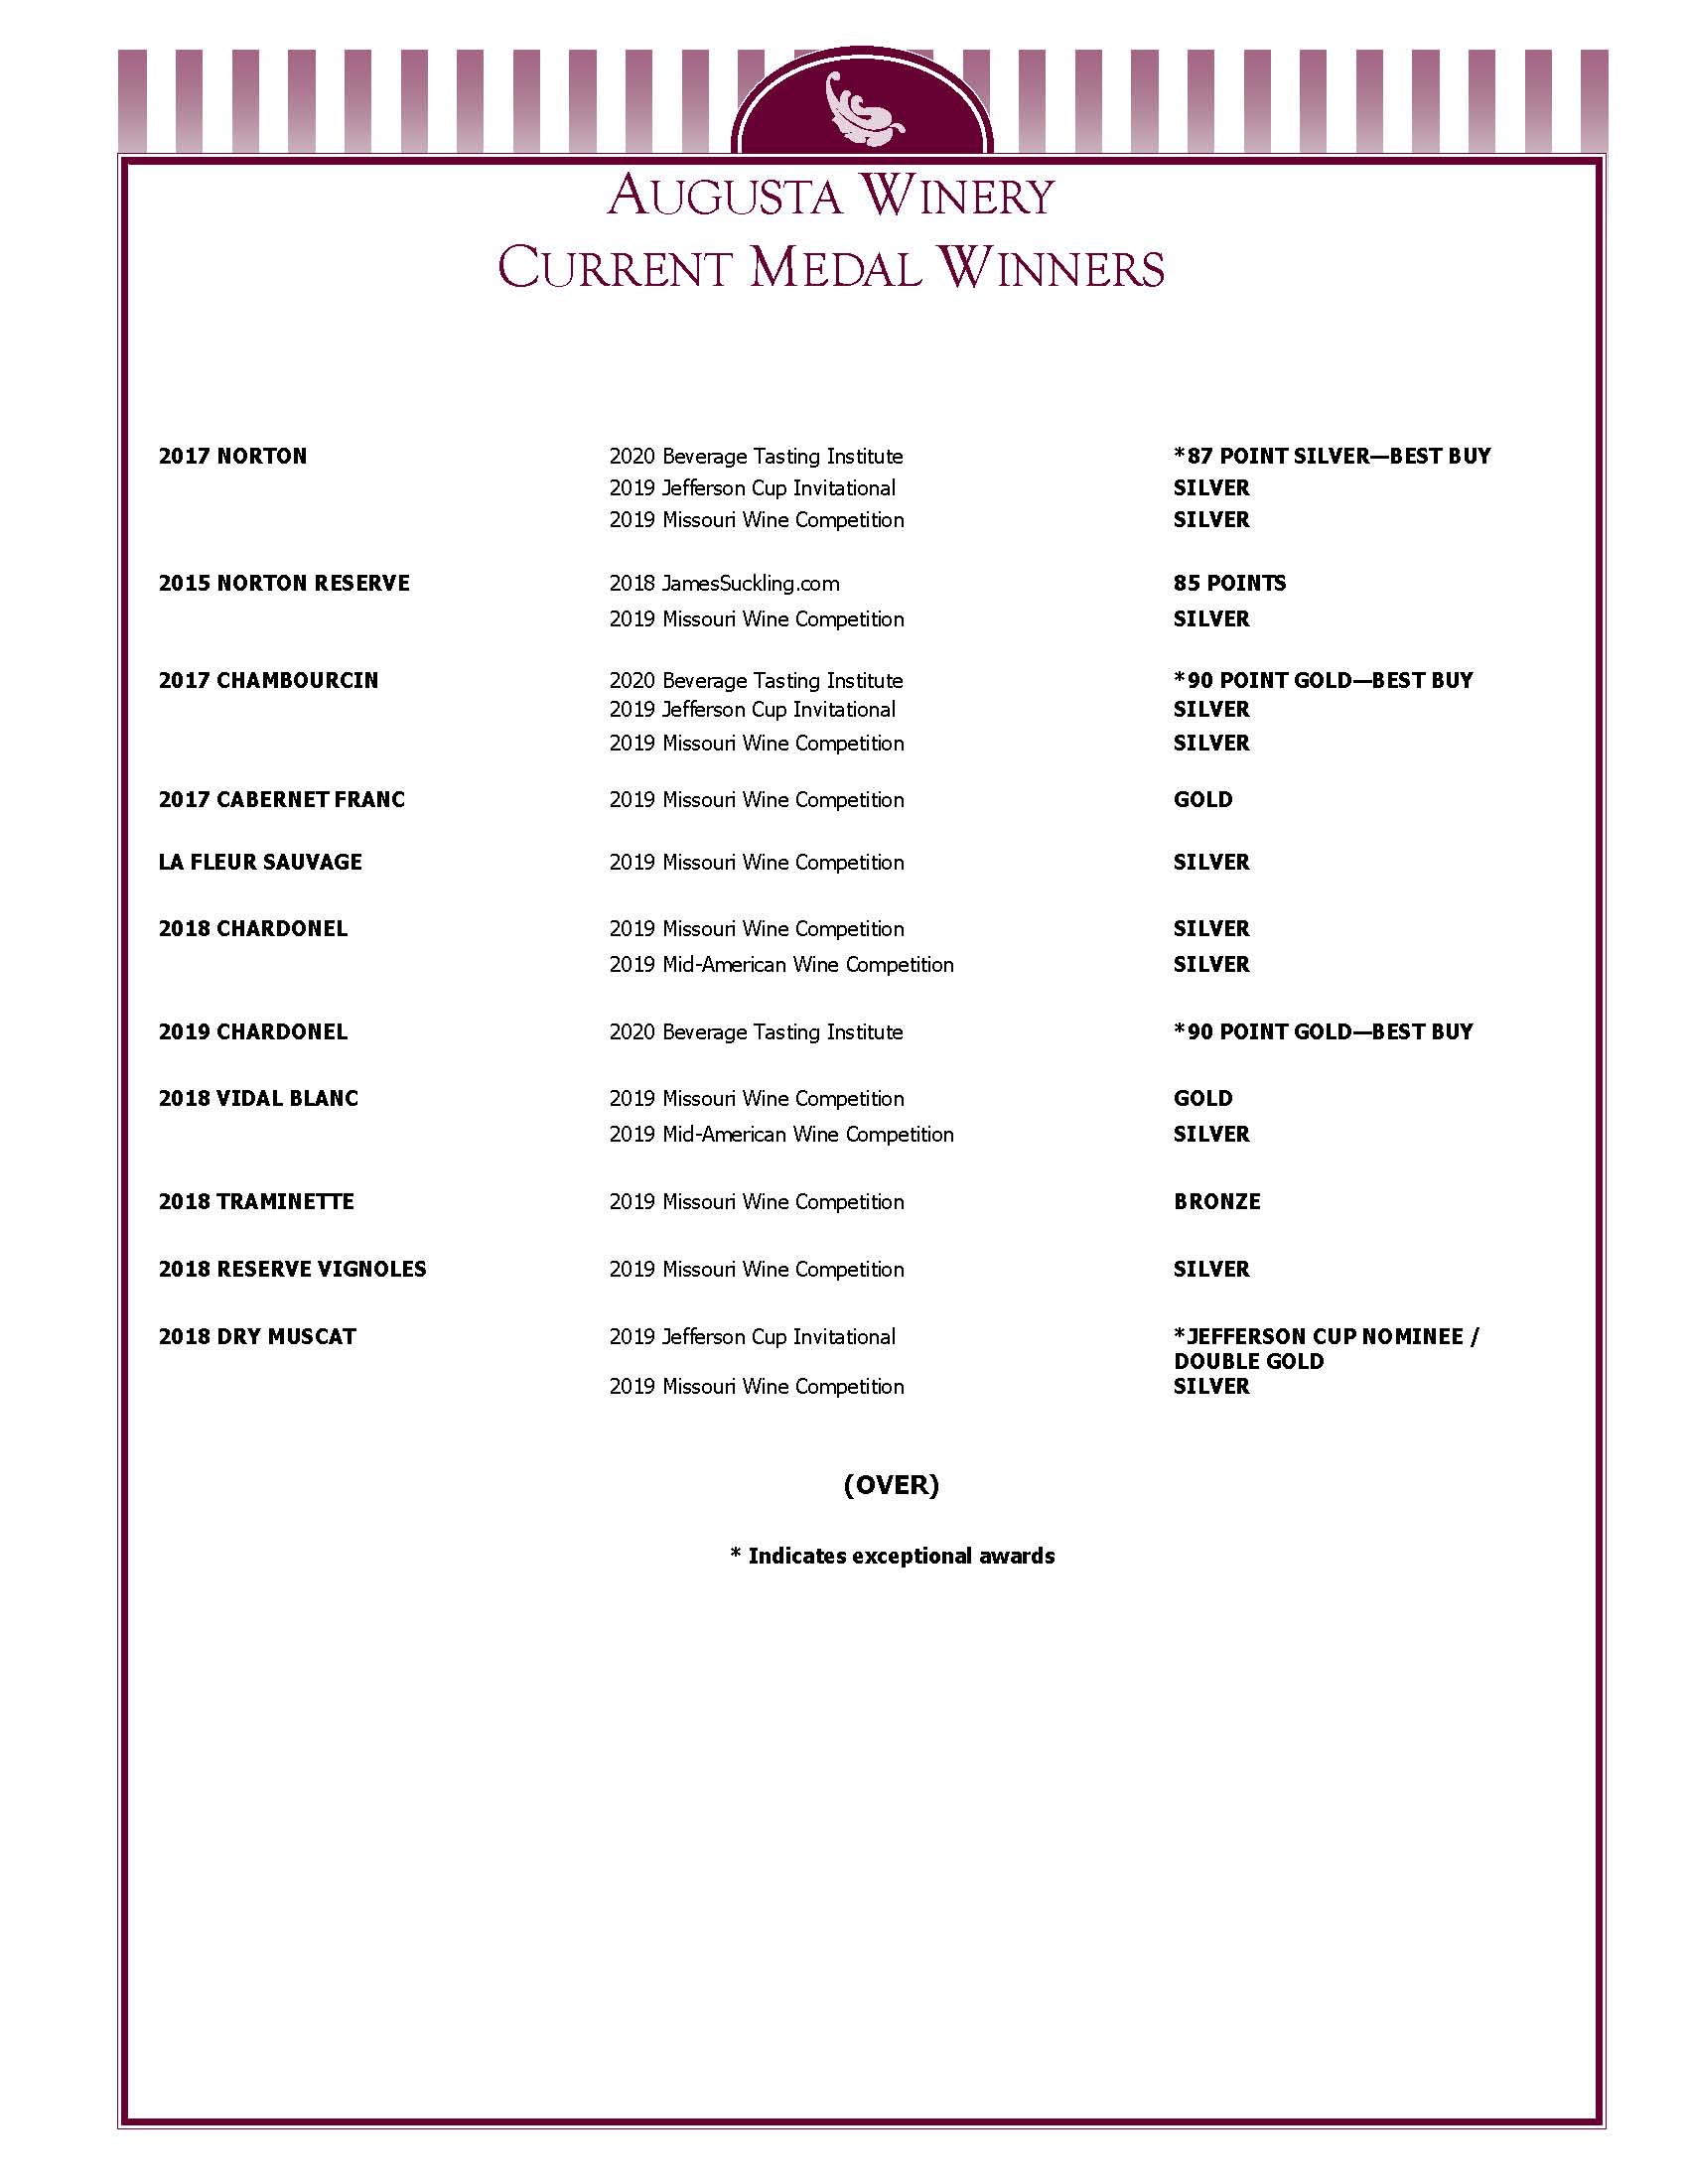 augusta winery awards page 1